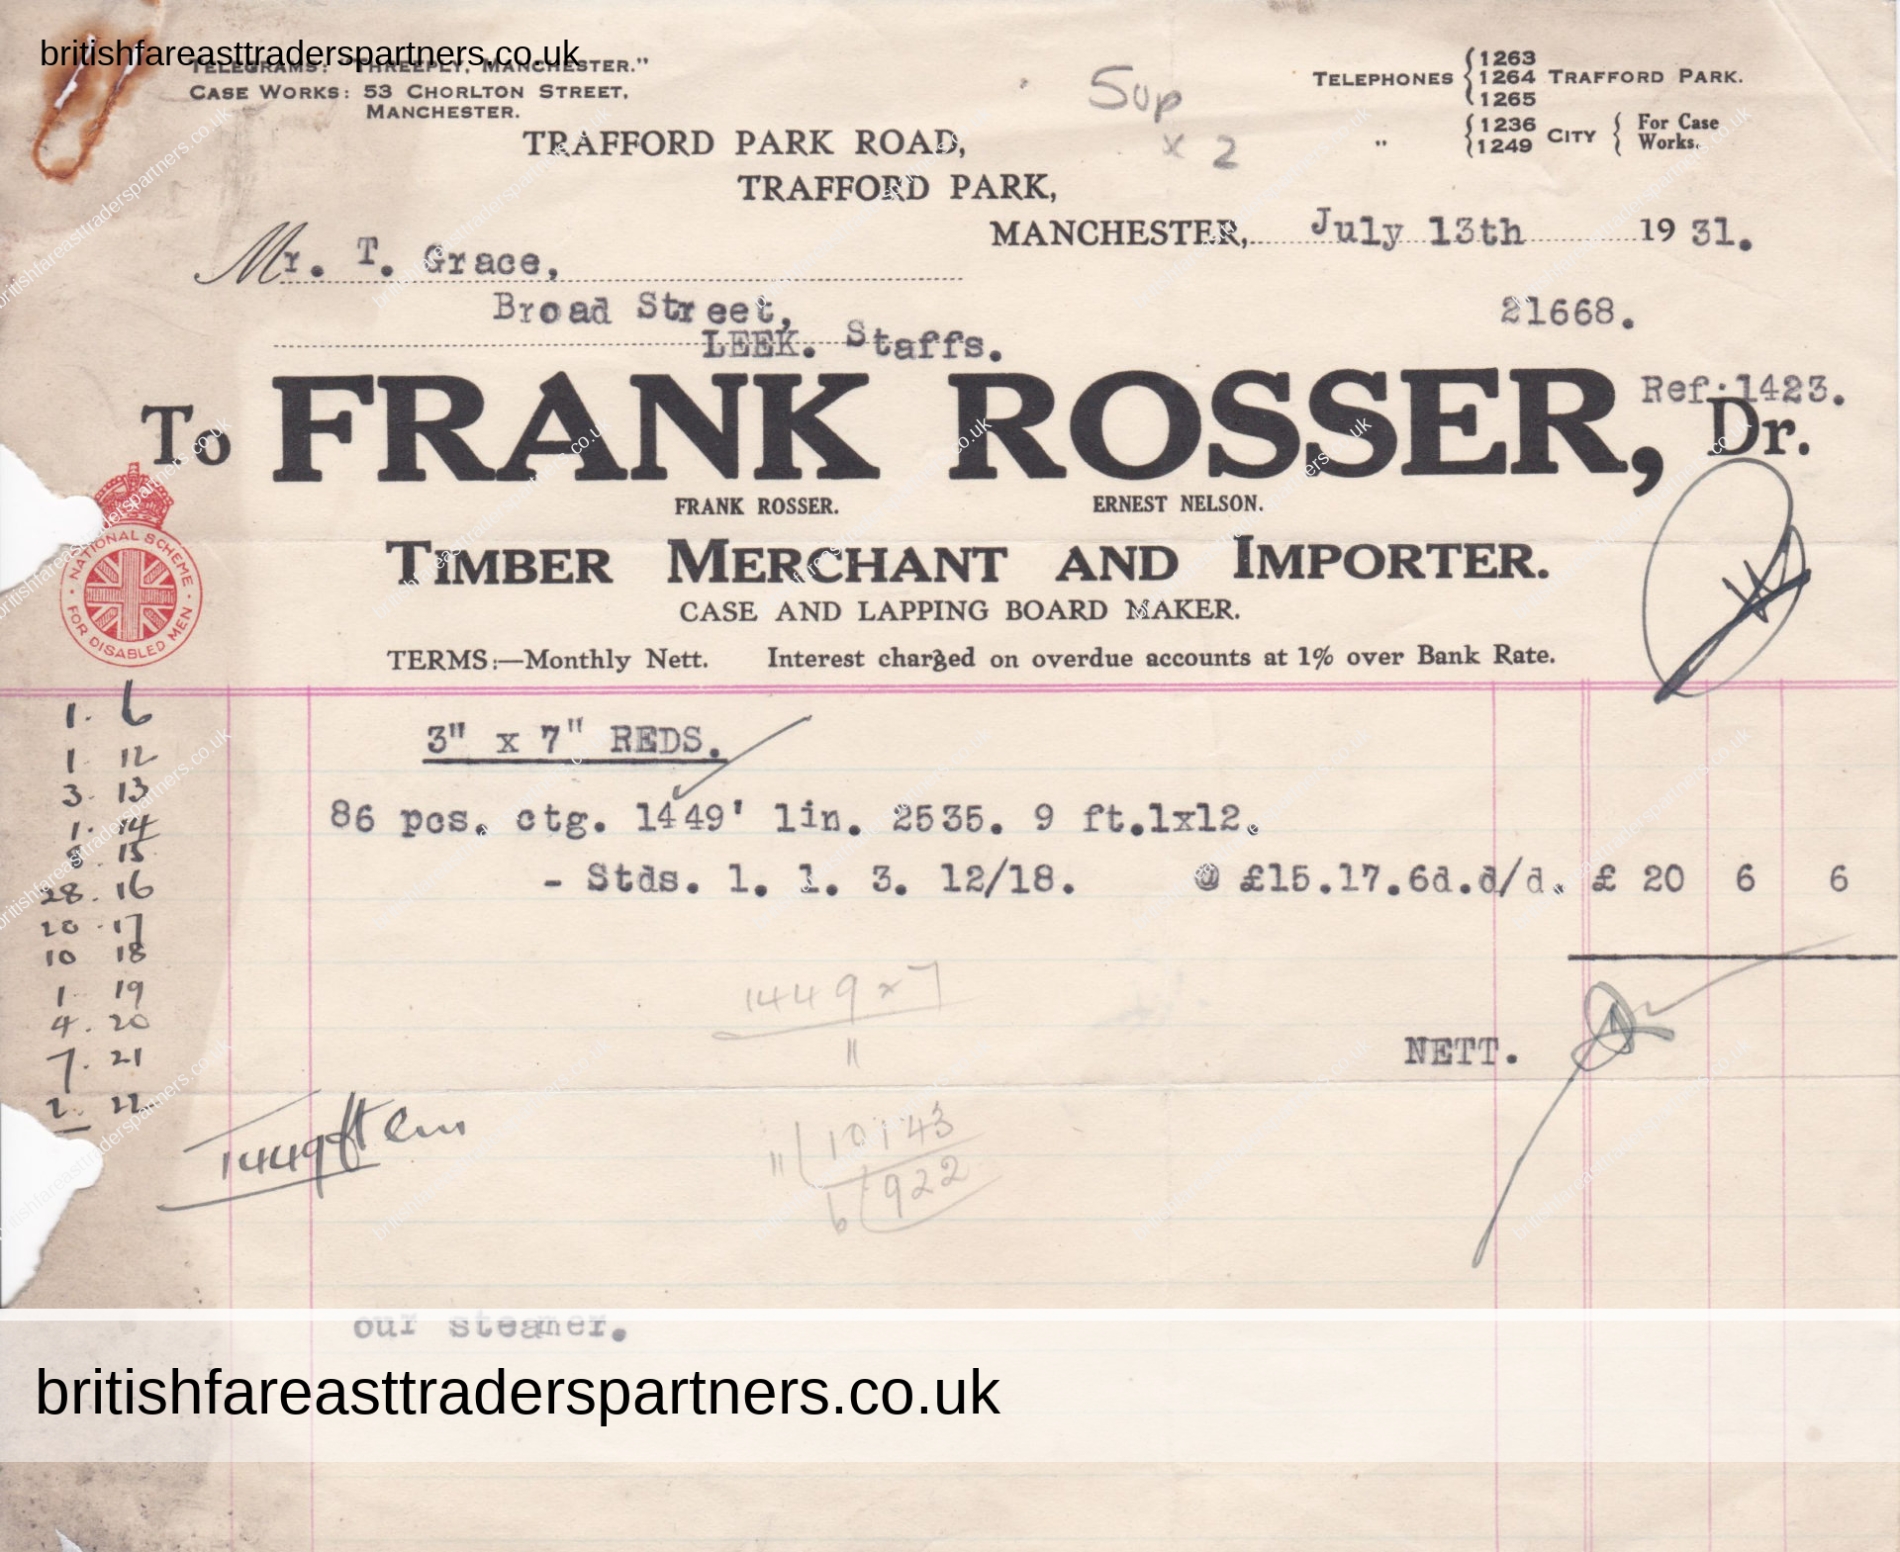 VINTAGE 1931 INVOICE / BILLHEAD “FRANK ROSSER”  TIMBER MERCHANT AND IMPORTER CASE AND LAPPING BOARD MAKER TRAFFORD PARK ROAD, TRAFFORD MARK, MANCHESTER COLLECTABLES | PAPER & EPHEMERA BUSINESS | COMPANIES |  INVESTMENTS | INDUSTRIES | HERITAGE | HISTORY